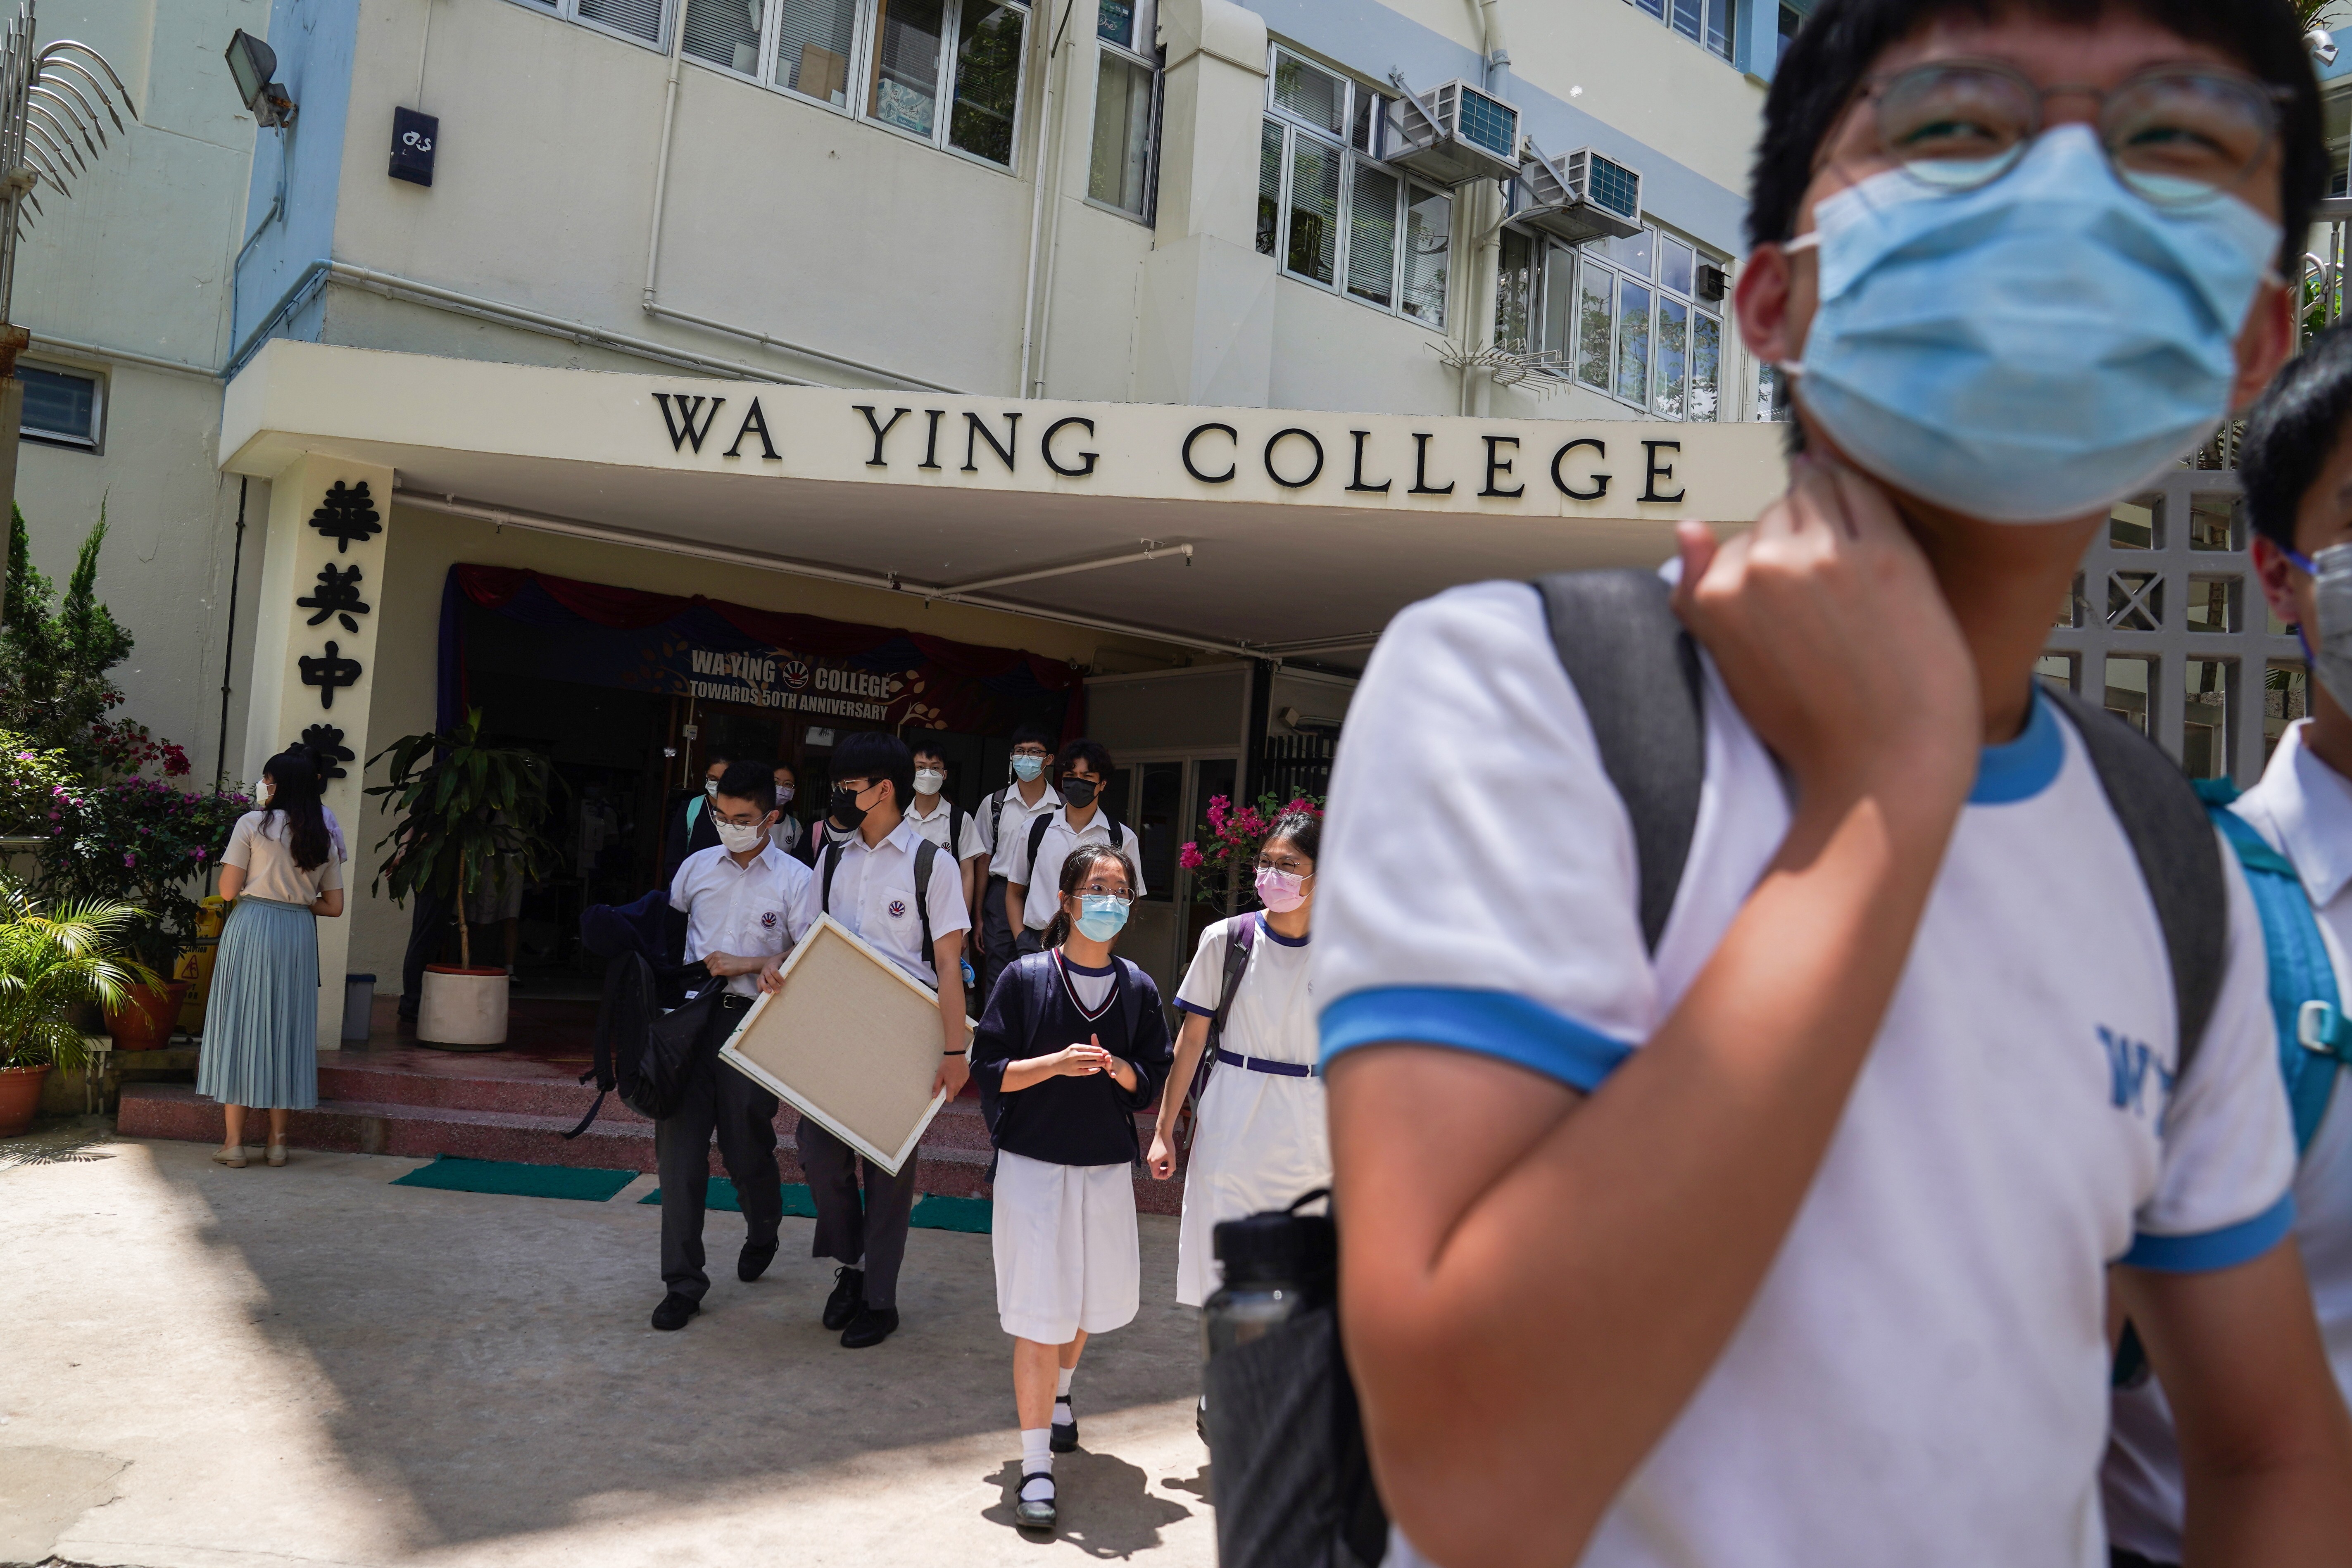 Lawmakers have raised concern over the management’s political stance at Wa Ying College in Ho Ma Tin. Photo: Sam Tsang